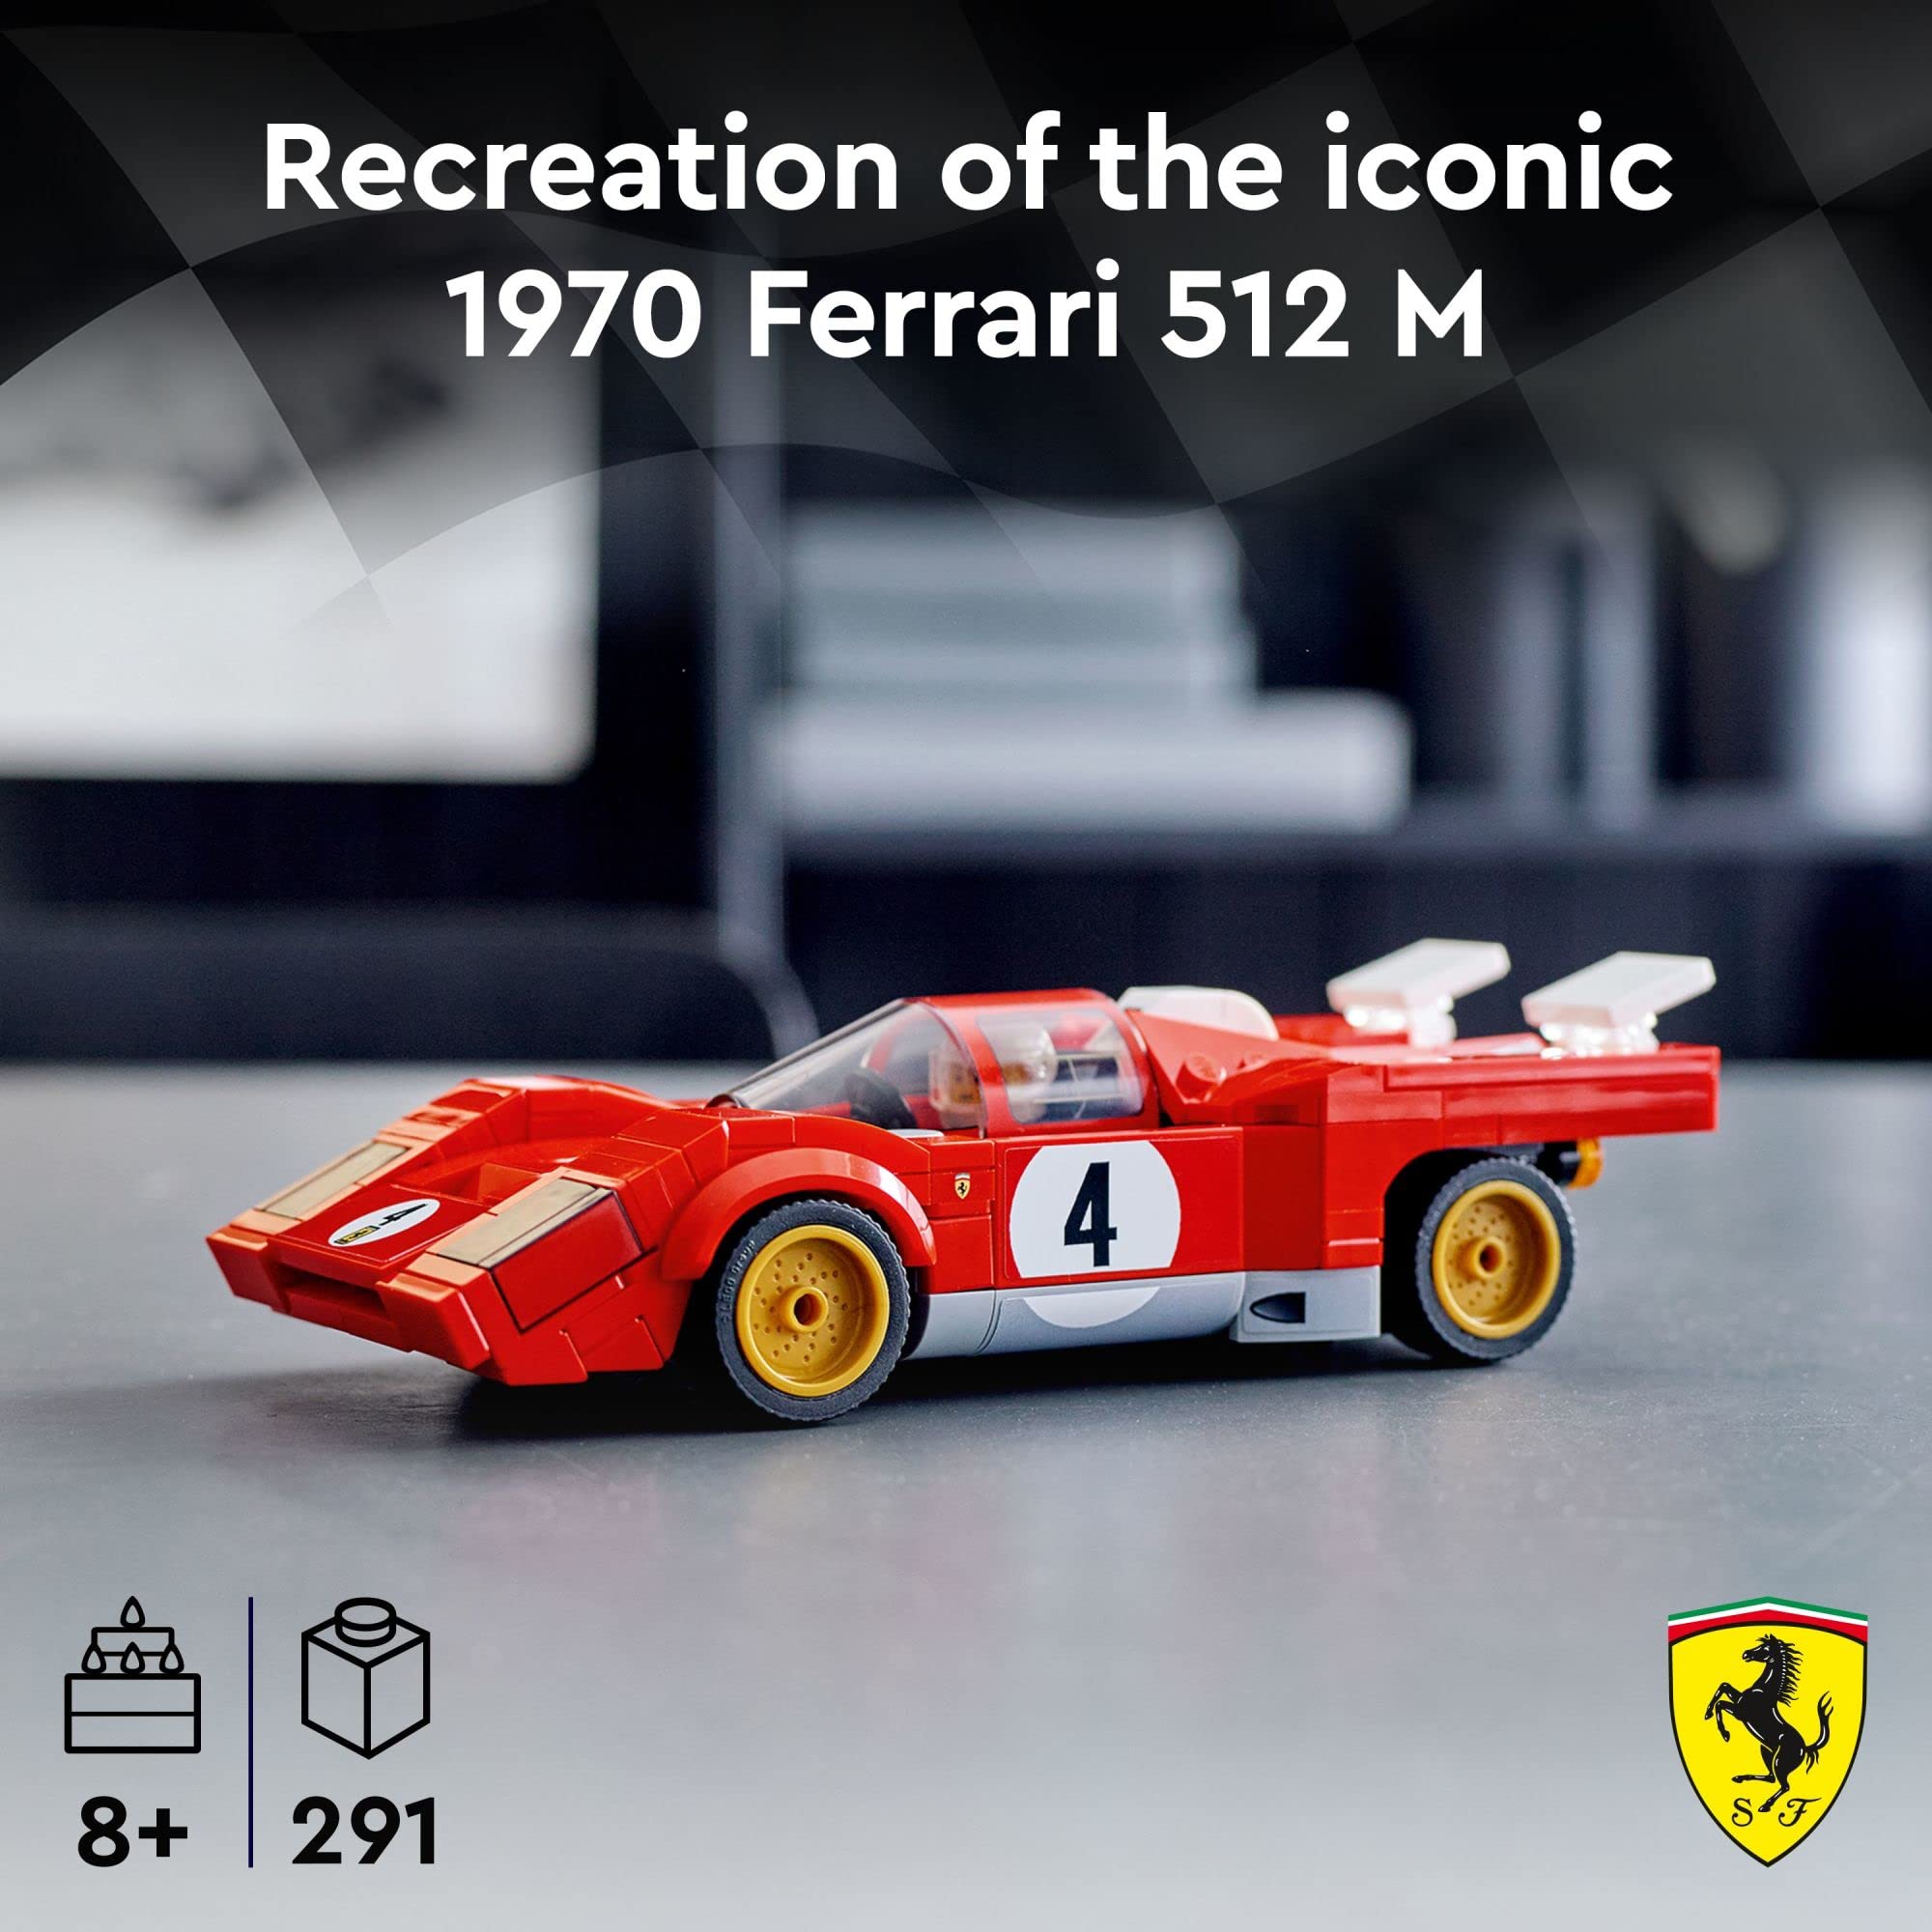 LEGO Speed Champions 1970 Ferrari 512 M 76906 Building Set - Sports Red Race Car Toy, Collectible Model Building Set with Racing Driver Minifigure, Great for Boys, Girls, and Kids Ages 8+